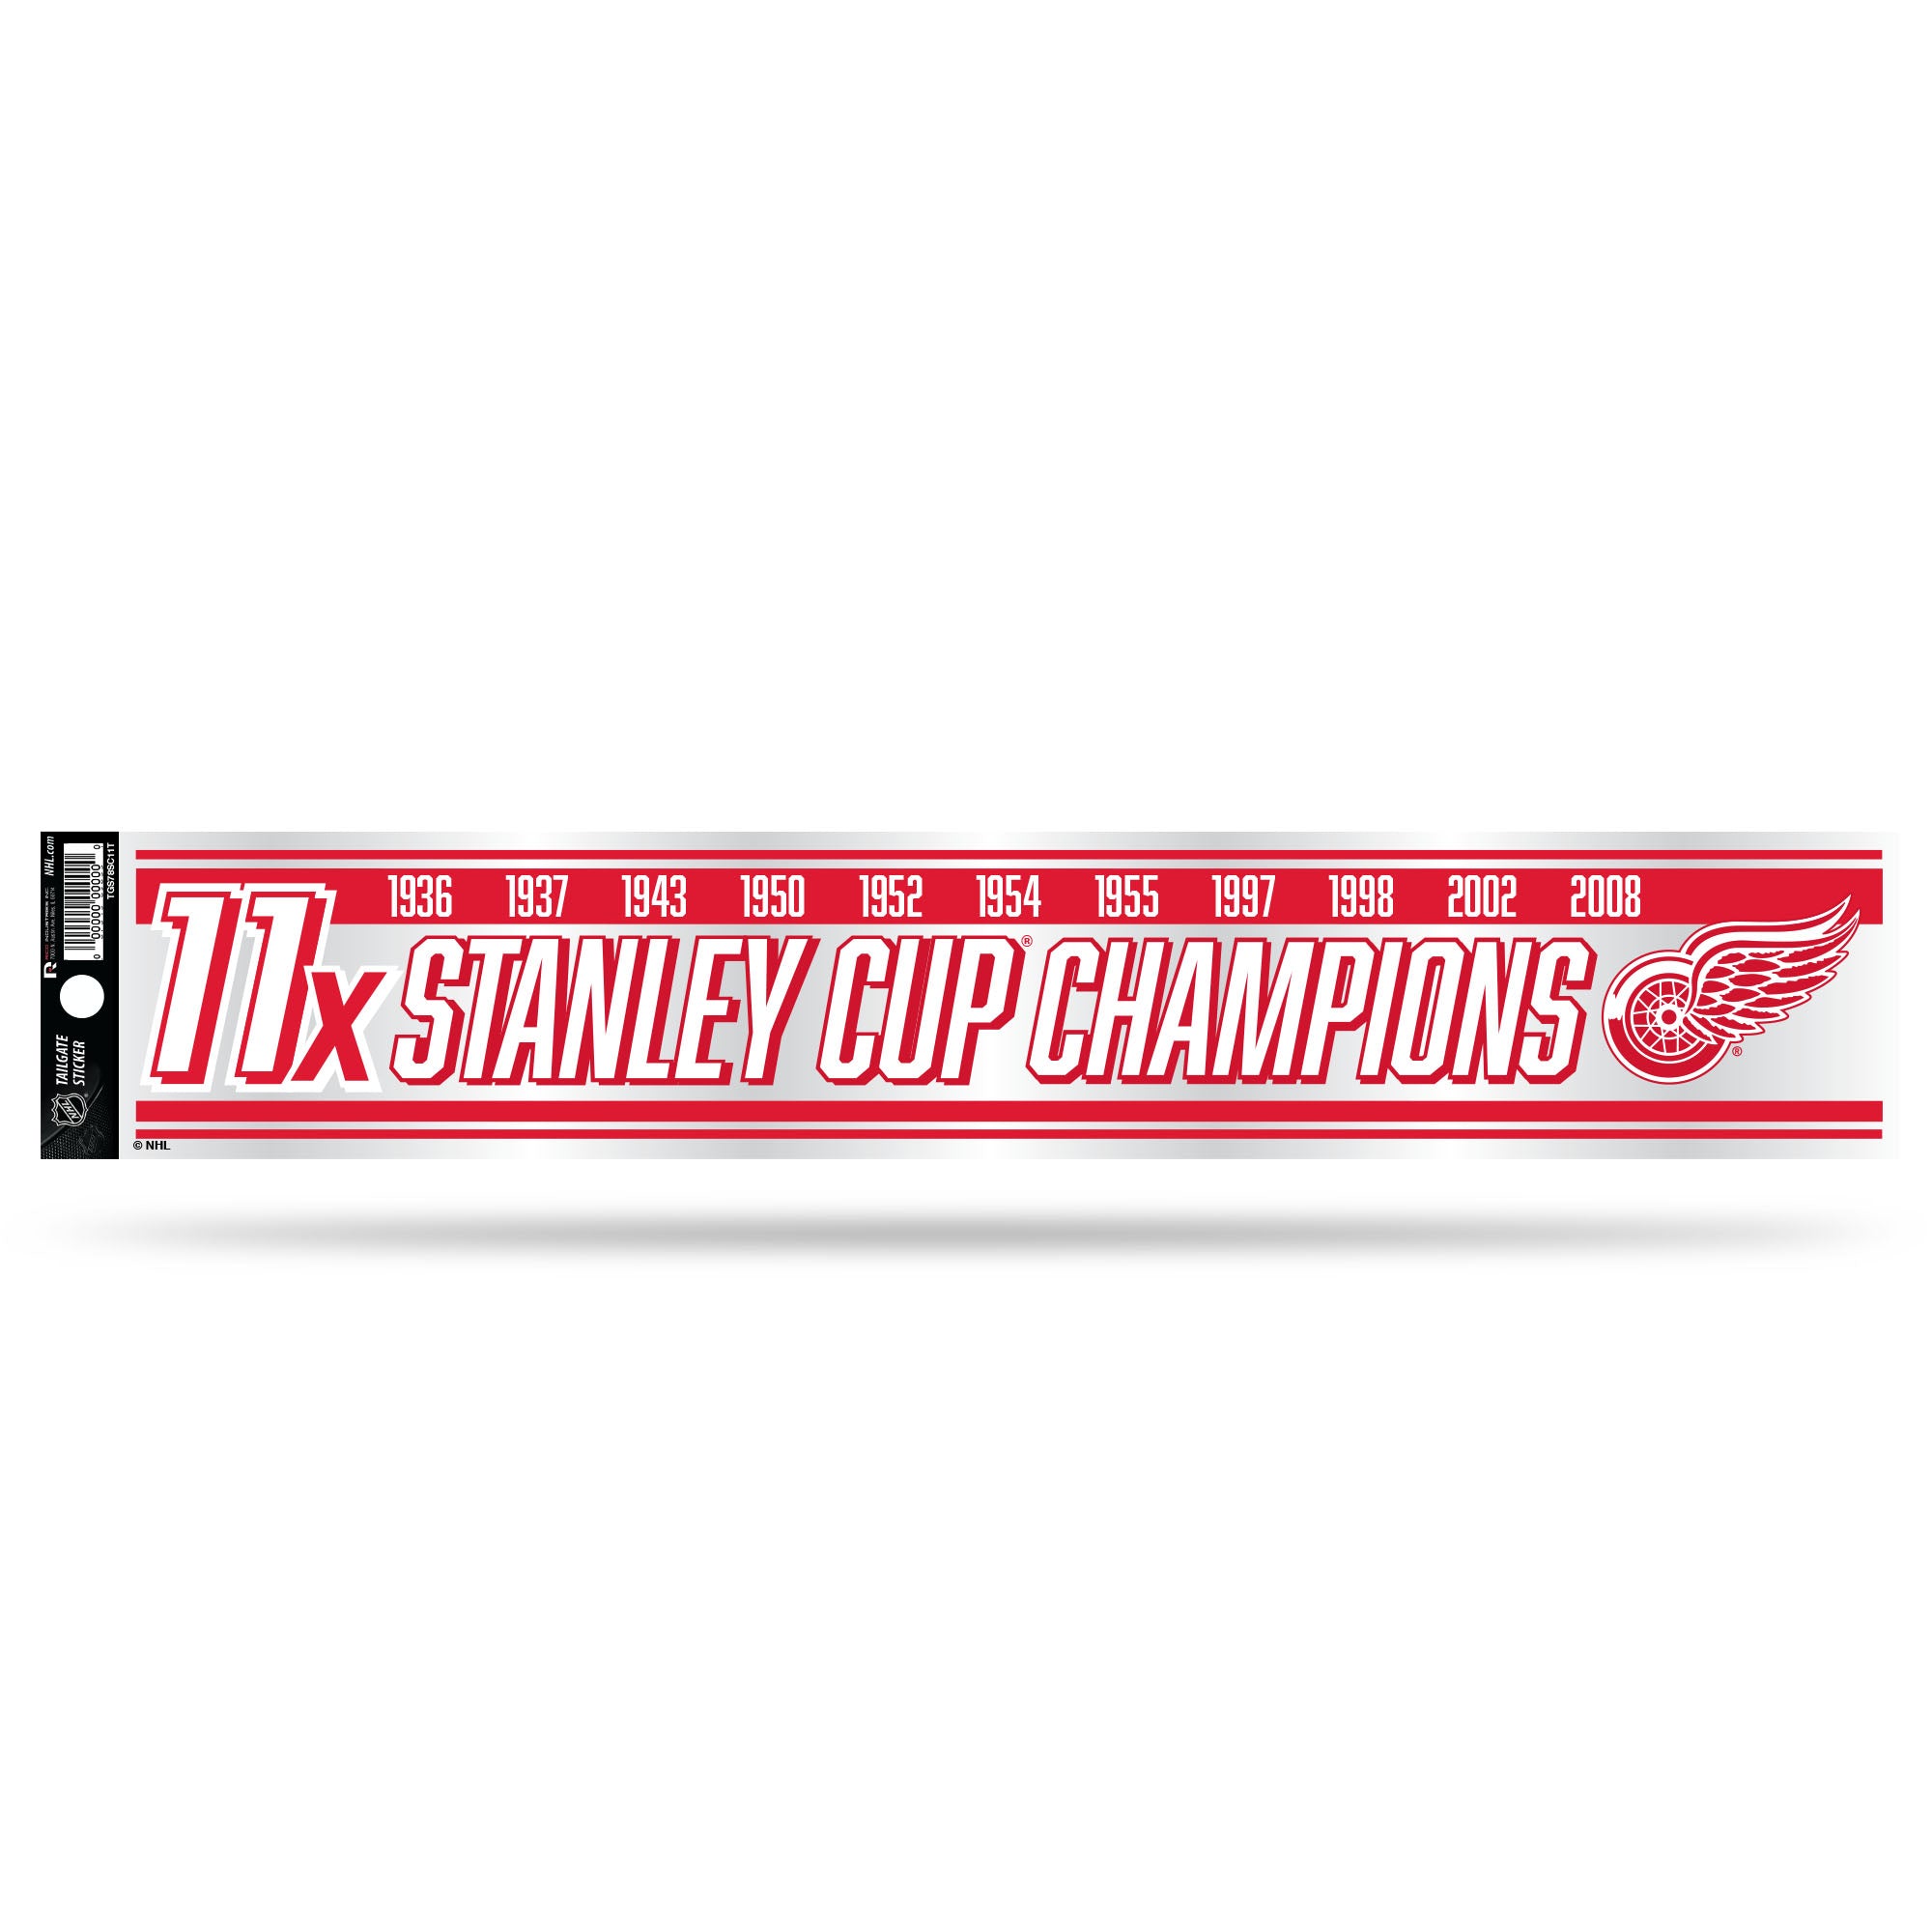 Red Wings Stanley Cup Banners Font? : r/DetroitRedWings